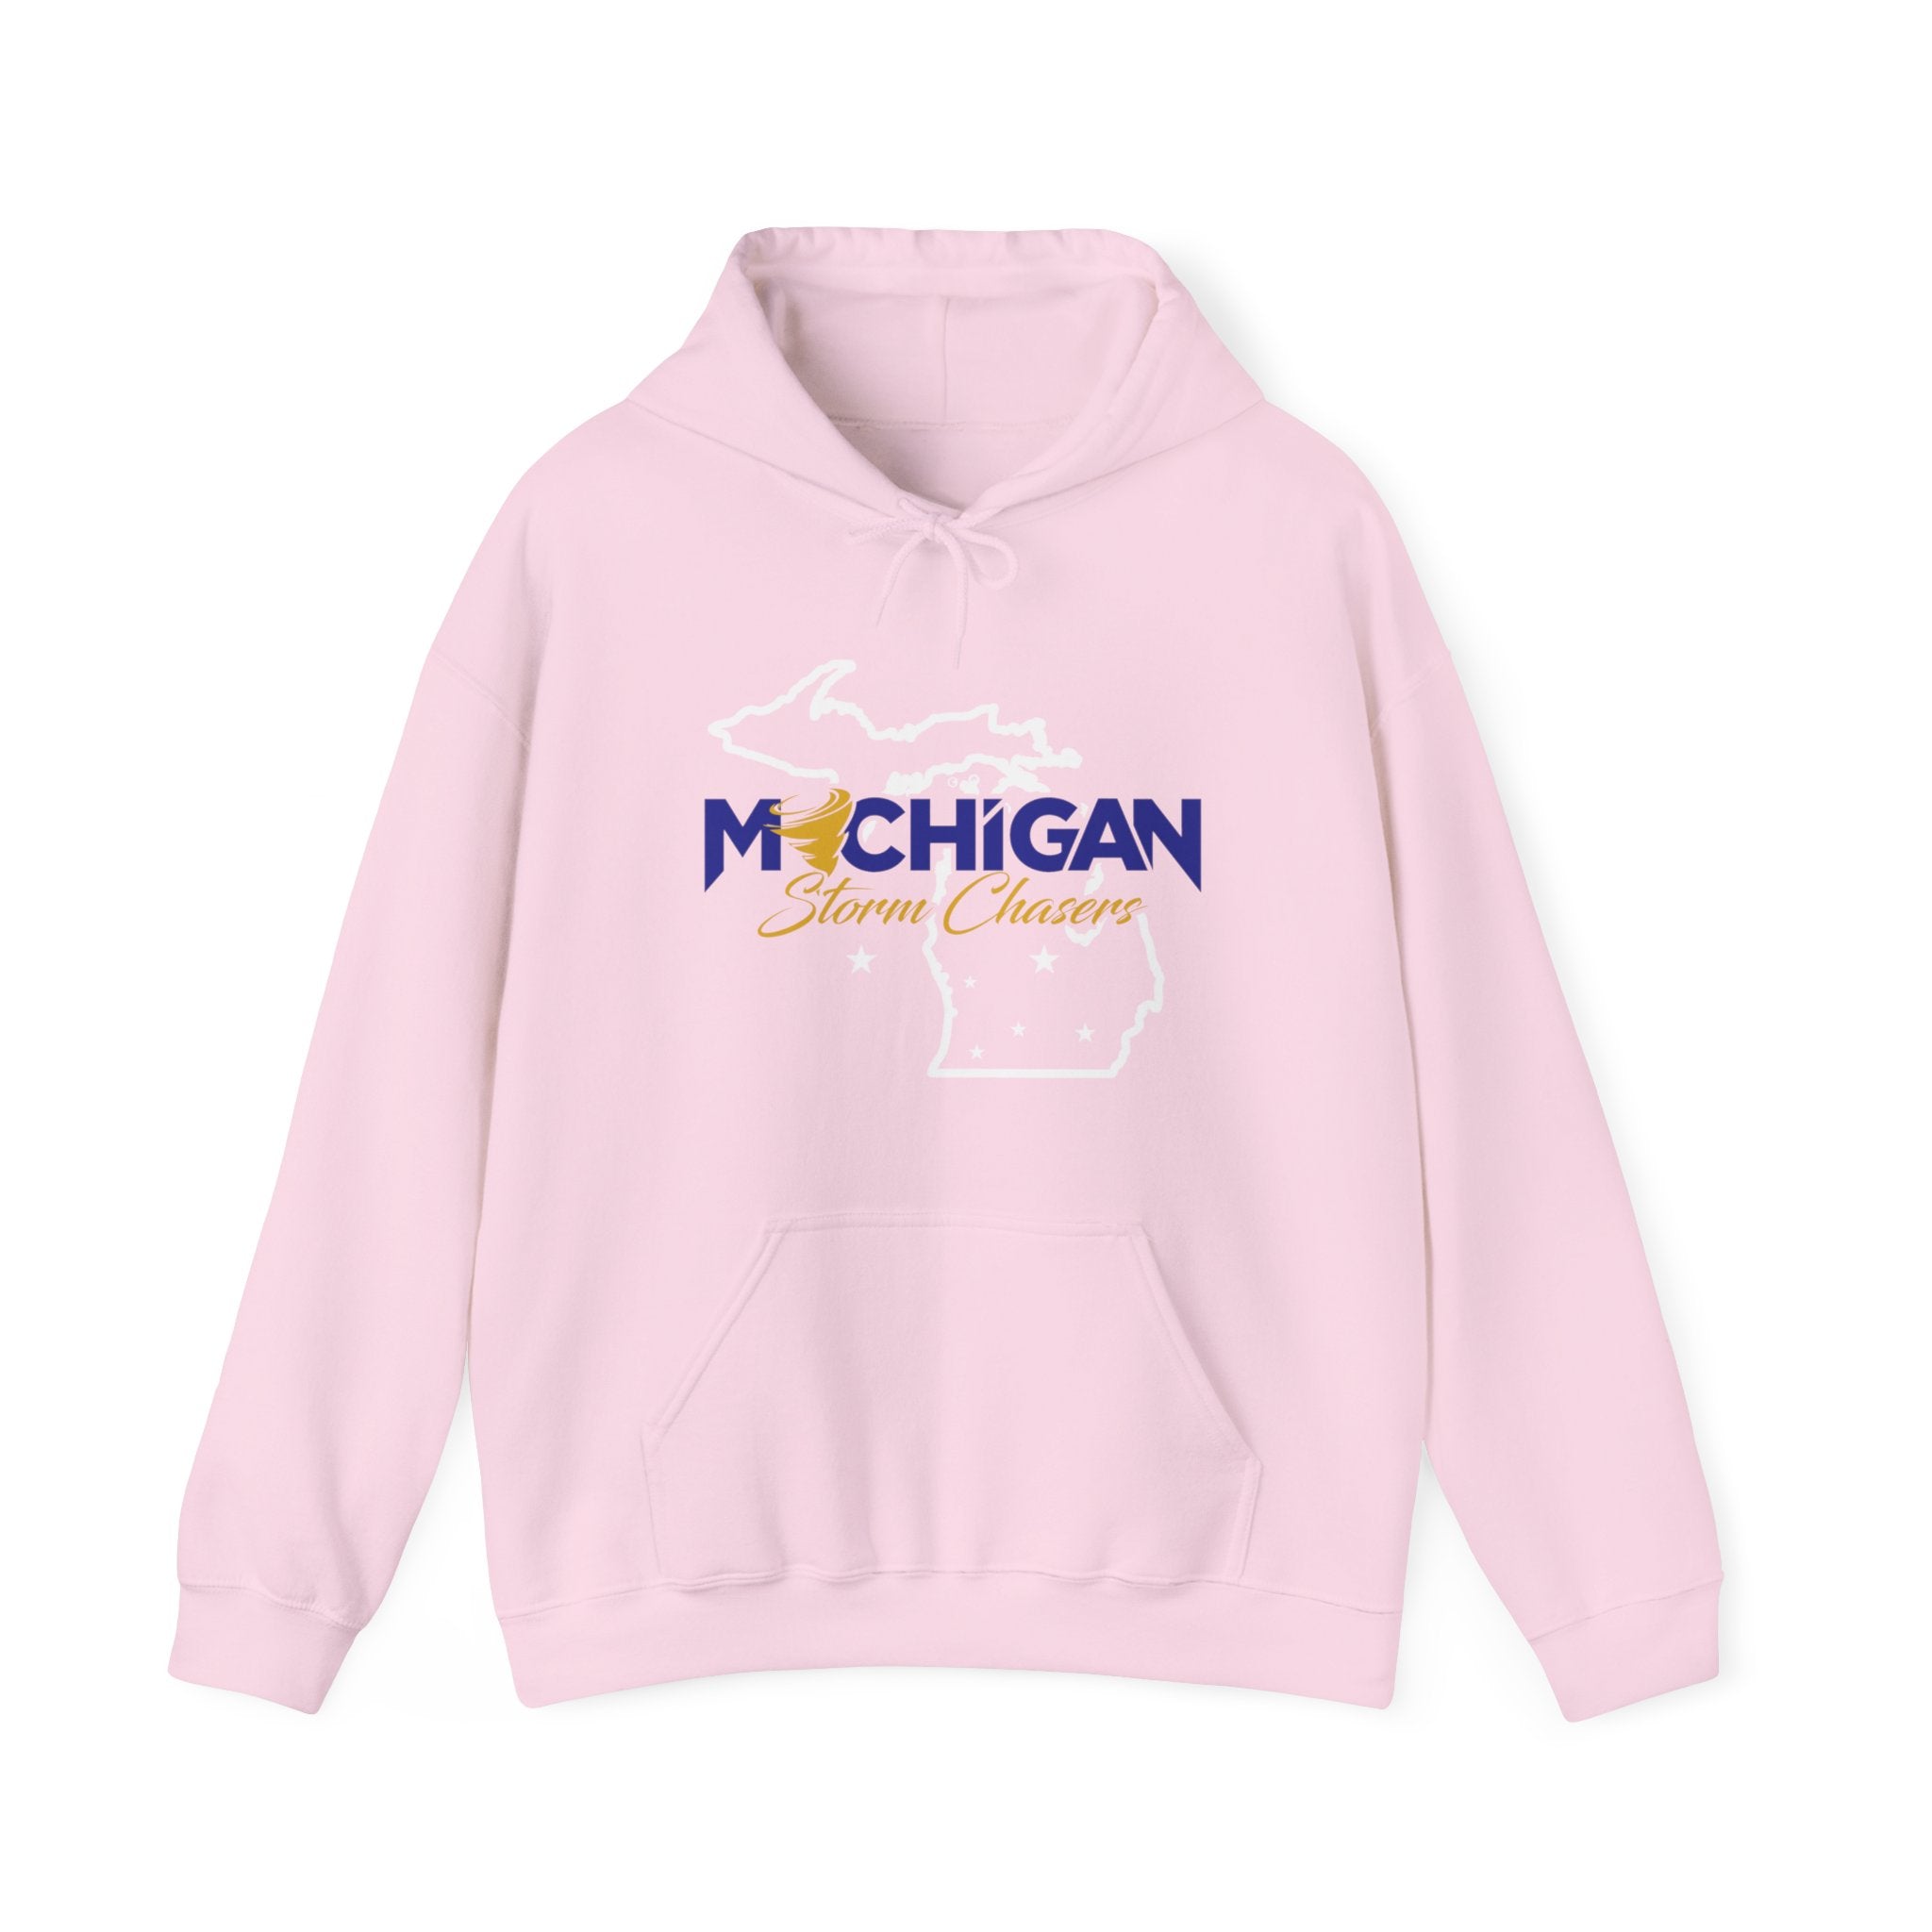 Michigan Storm Chasers Hoodie 